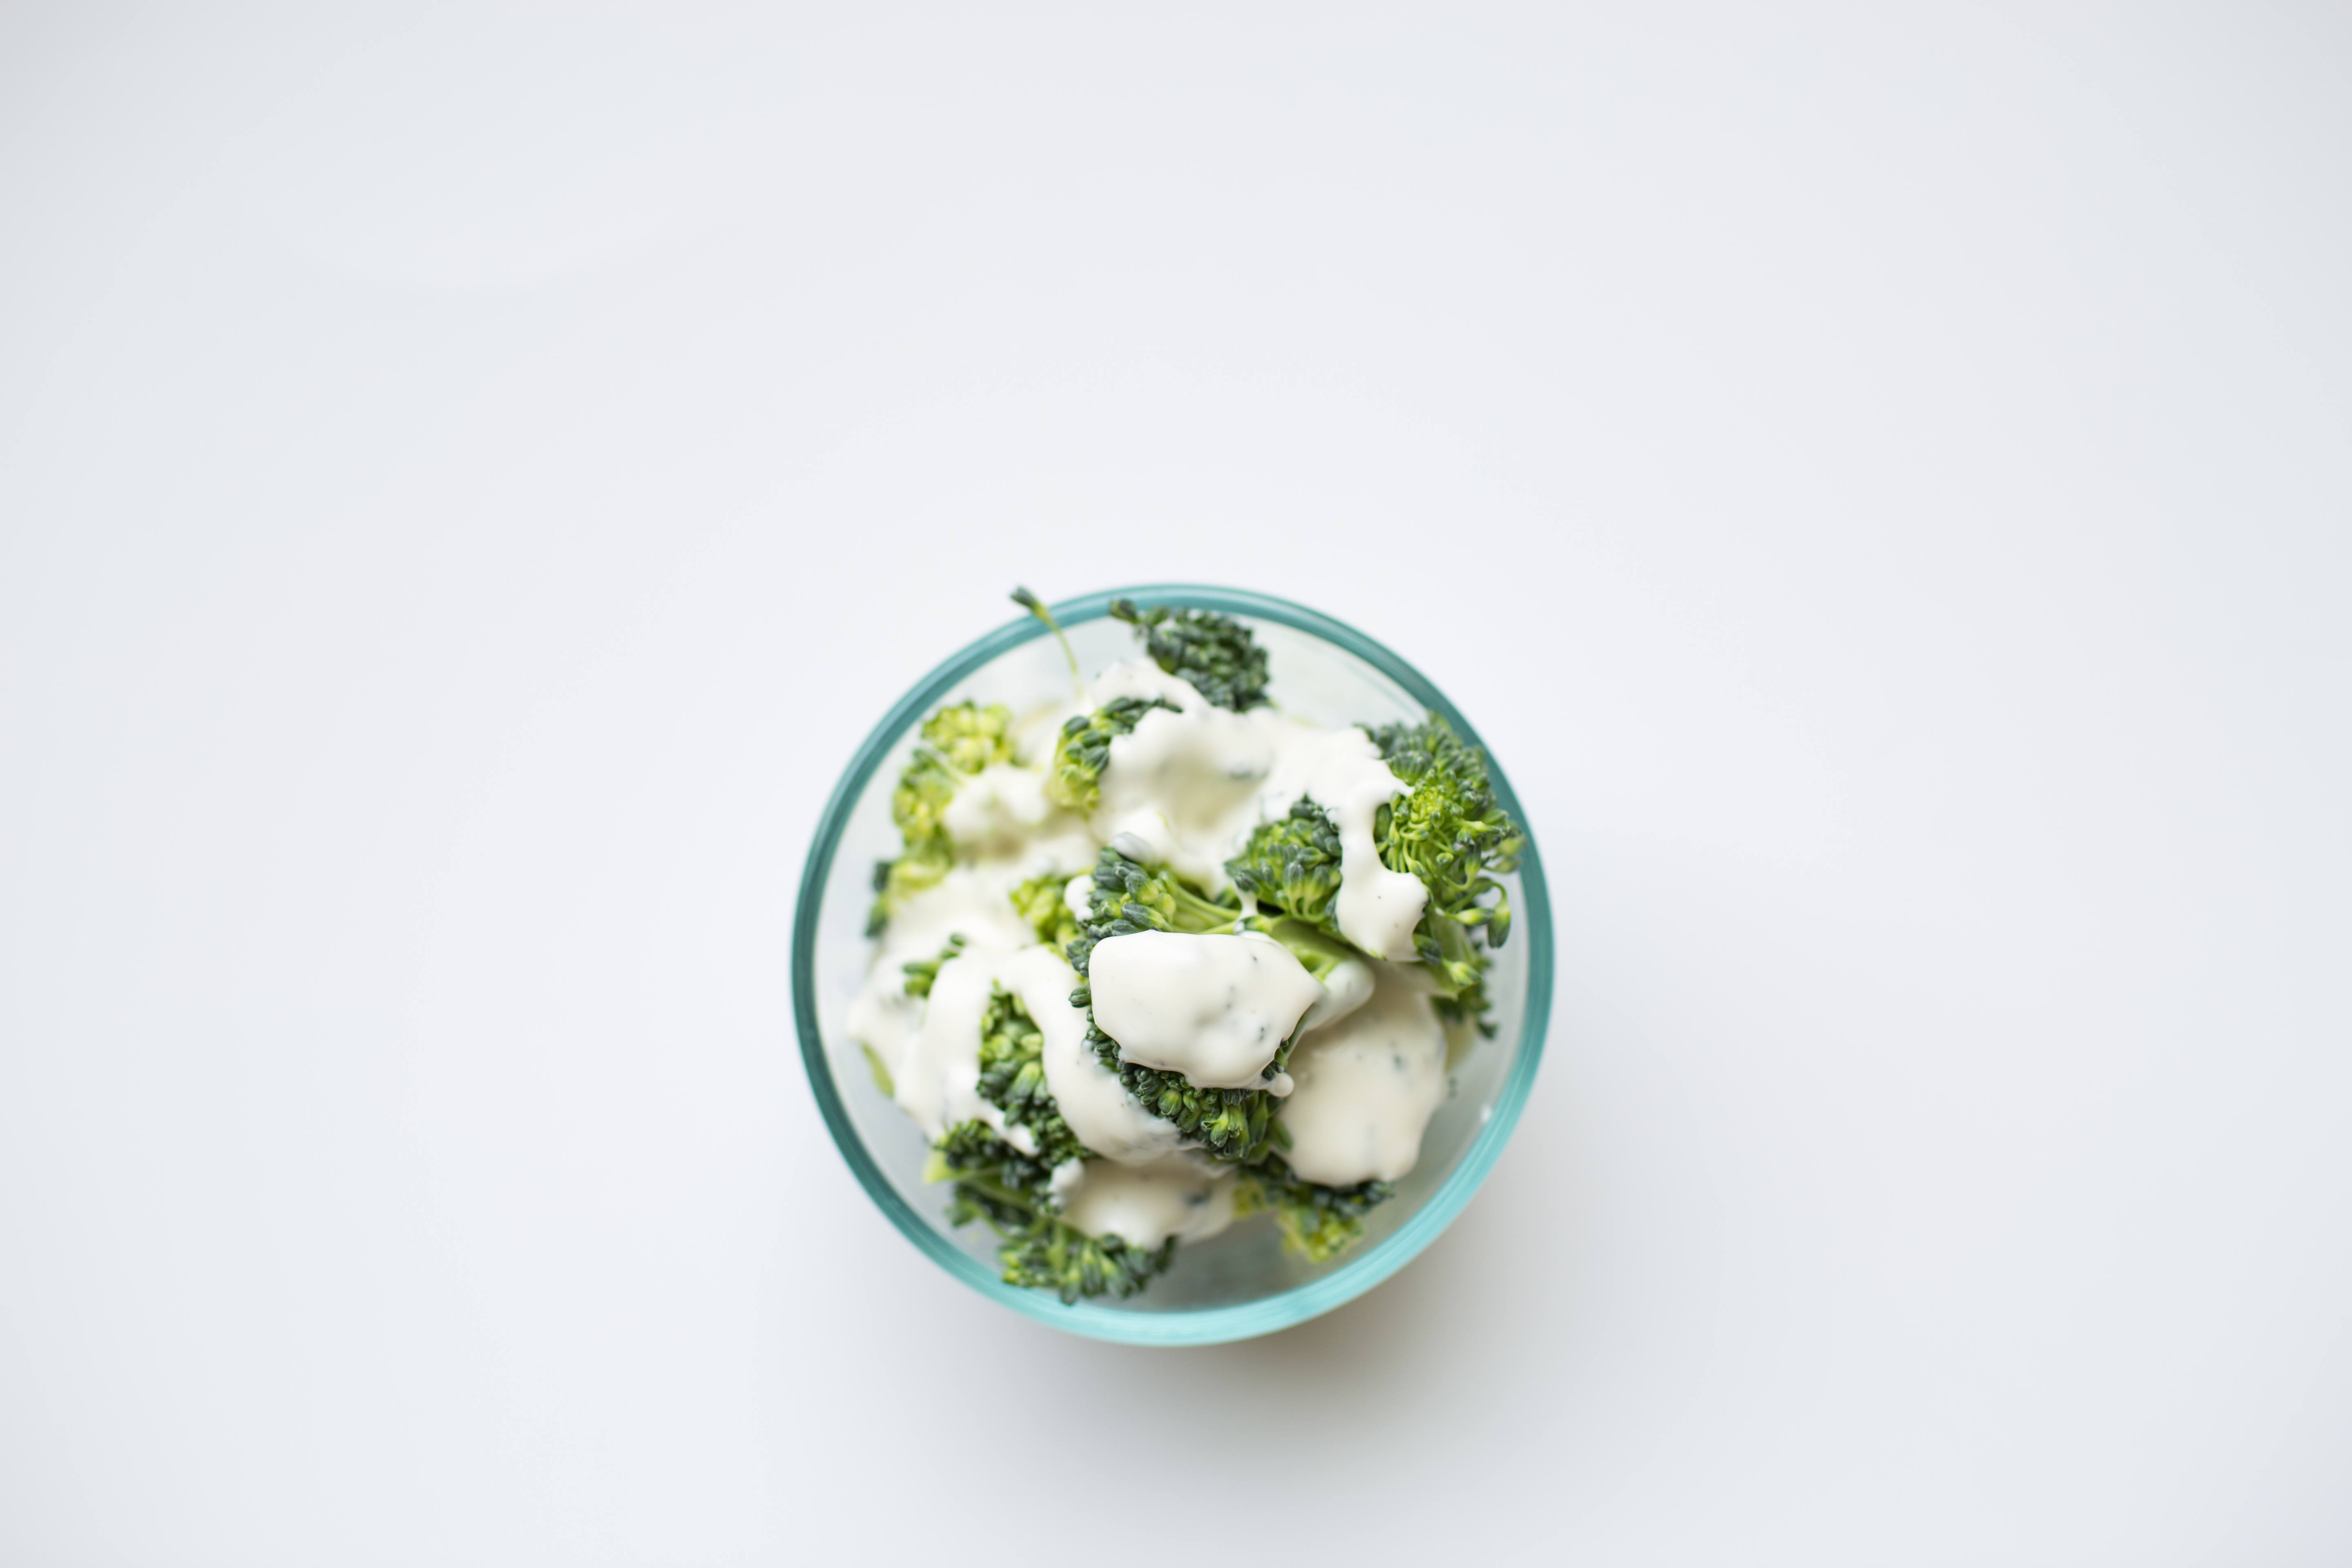 100 calorie snack broccoli with ranch dressing